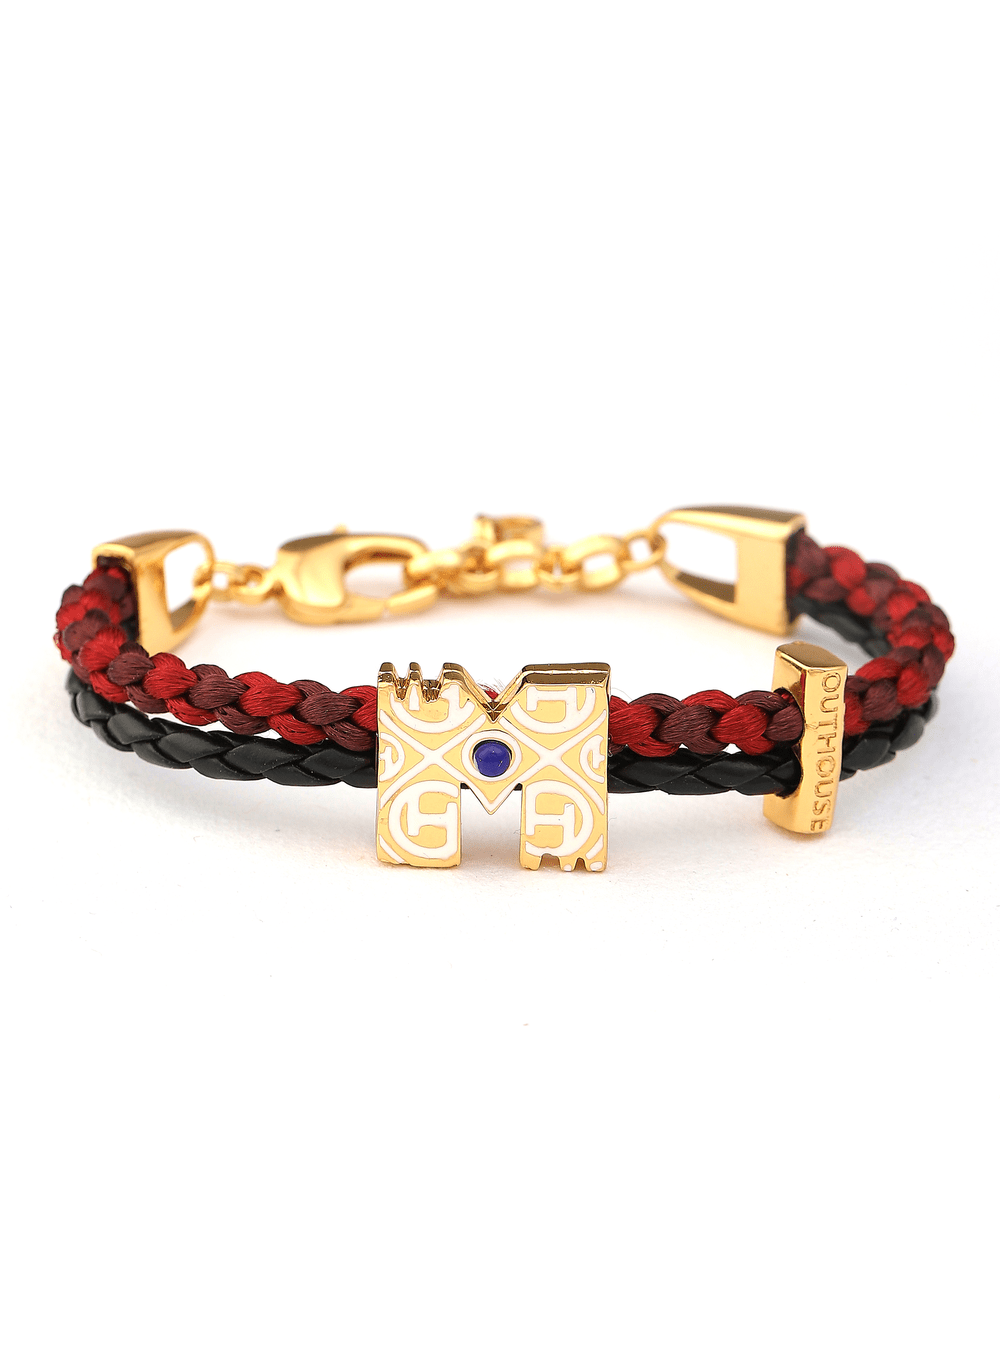 Luxury Nimble Wide Gold Diamond Michael Steele Bangles Bracelet For Women  And Men High Quality Unisex Jewelry For Fashionable Parties From  Elegantmaria, $18.02 | DHgate.Com